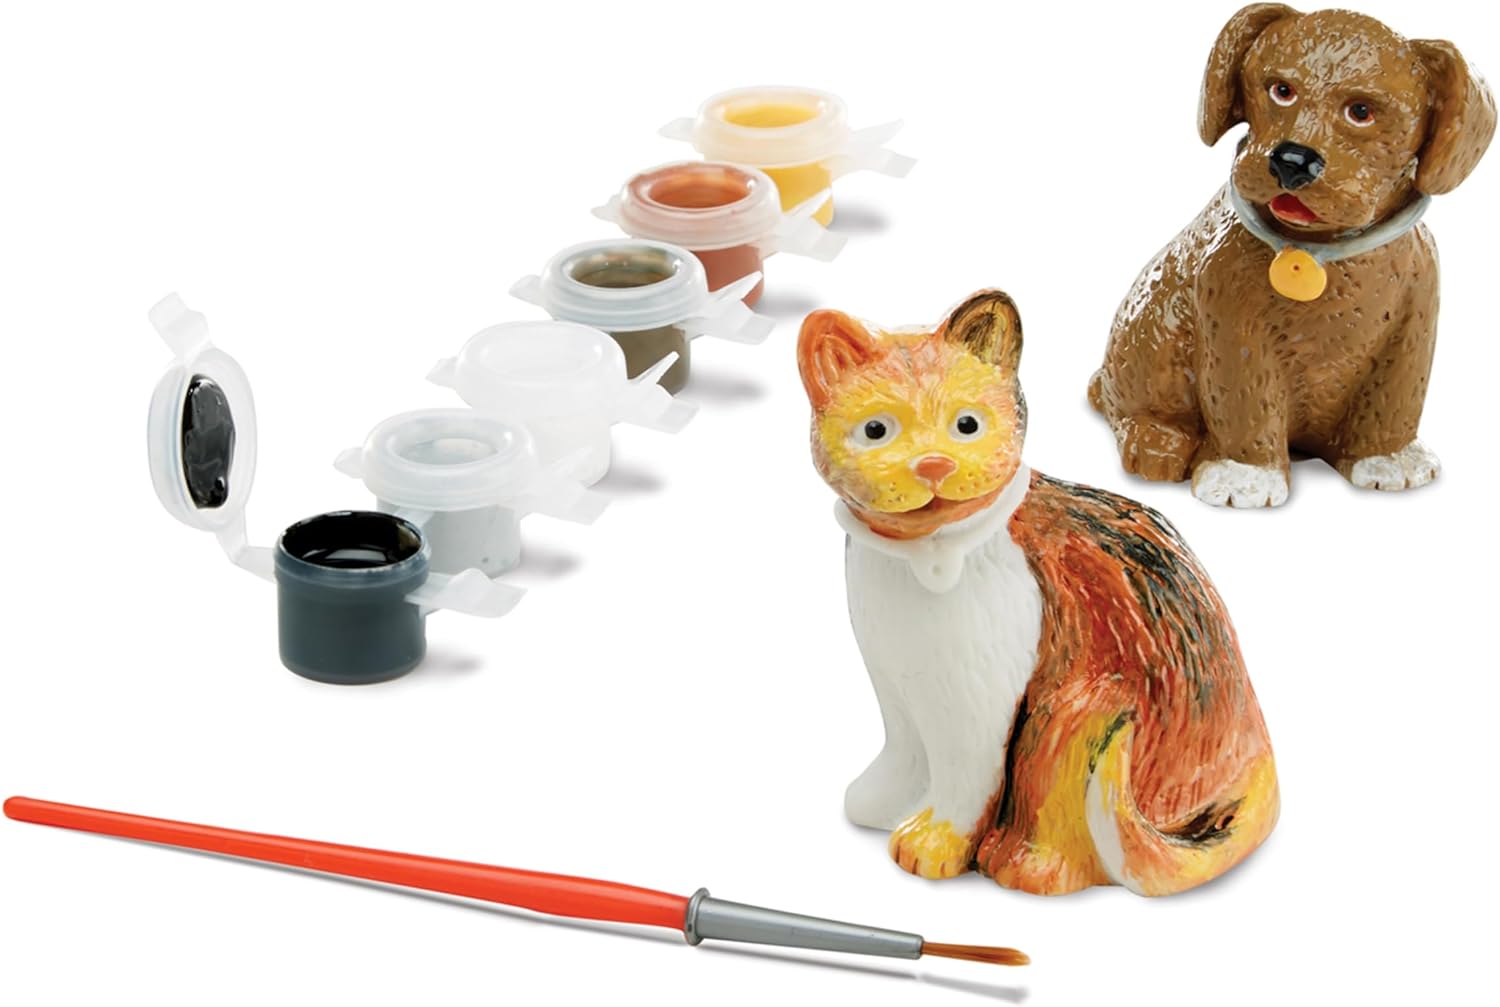 Created By Me! Pets Figurines Craft Kit